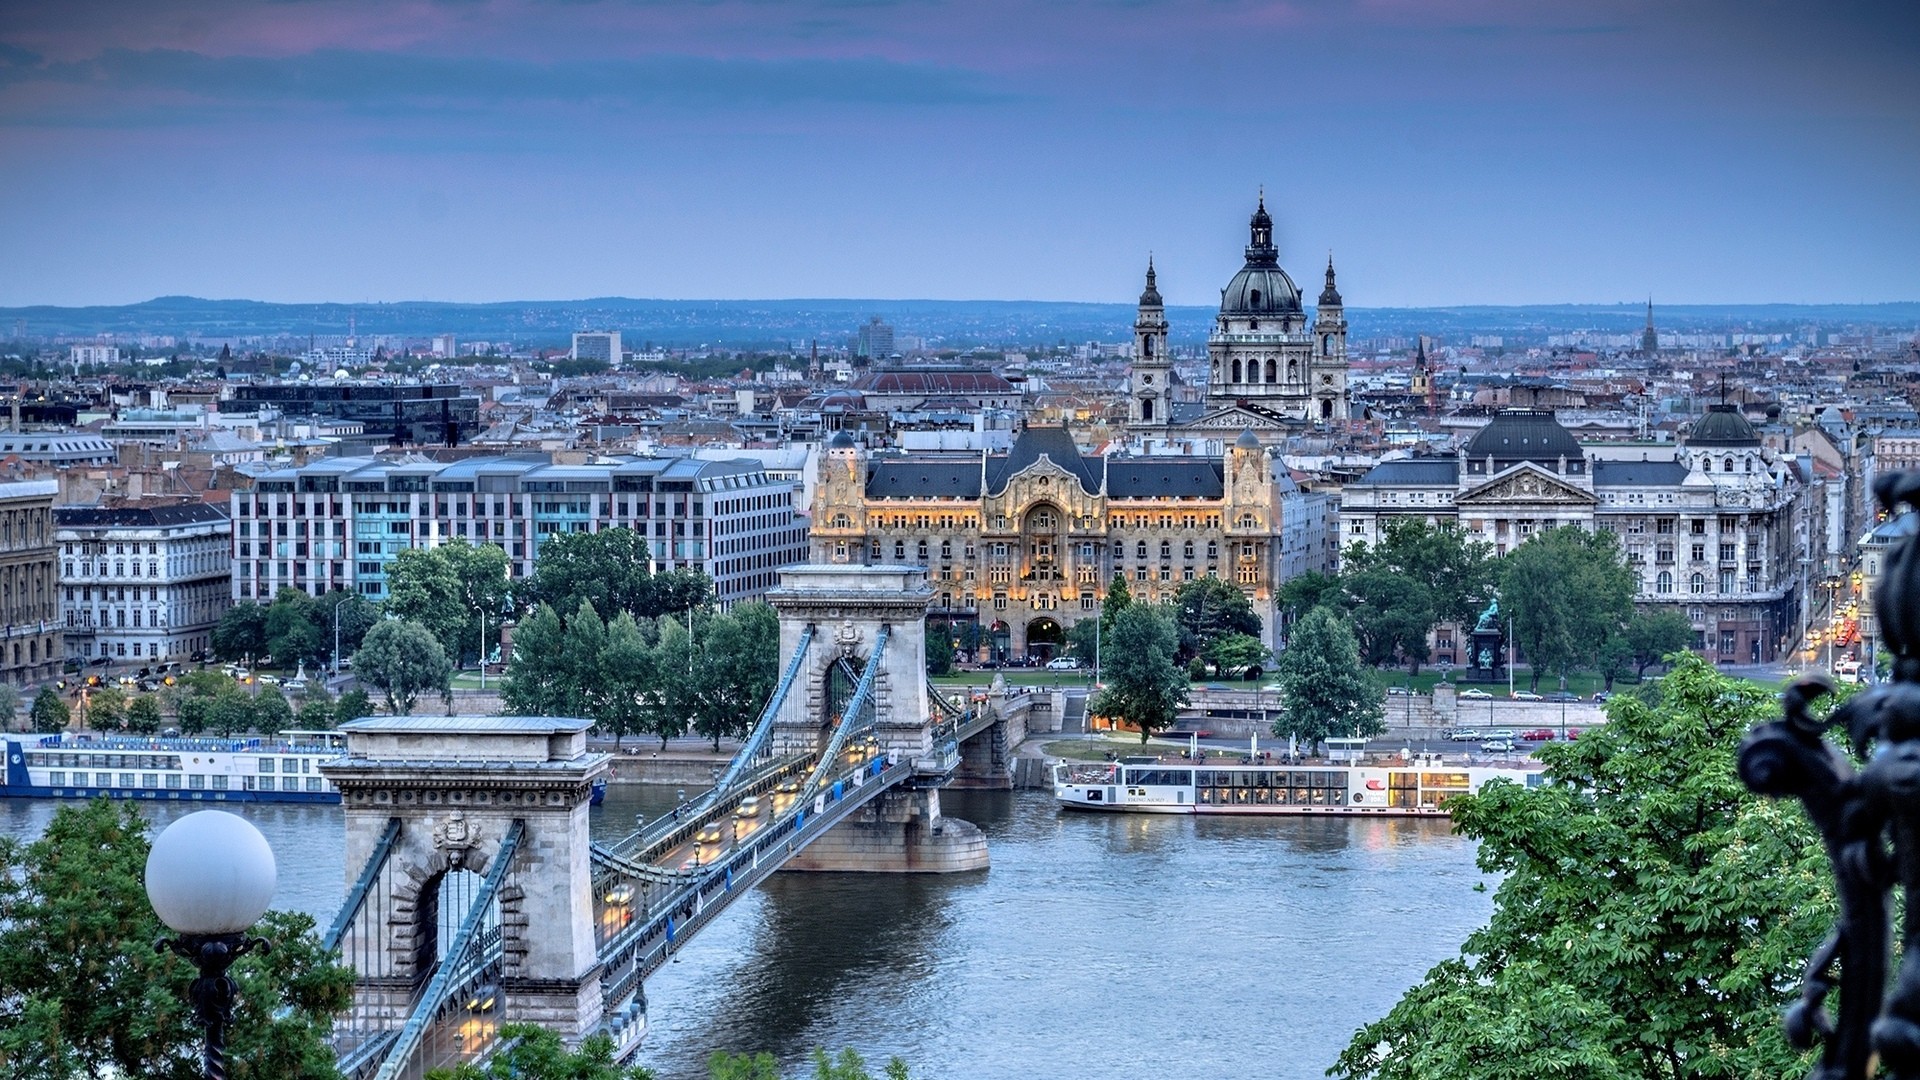 Cityscape Architecture Building Budapest Hungary Old Building River Chain Bridge Ship Cathedral Even 1920x1080